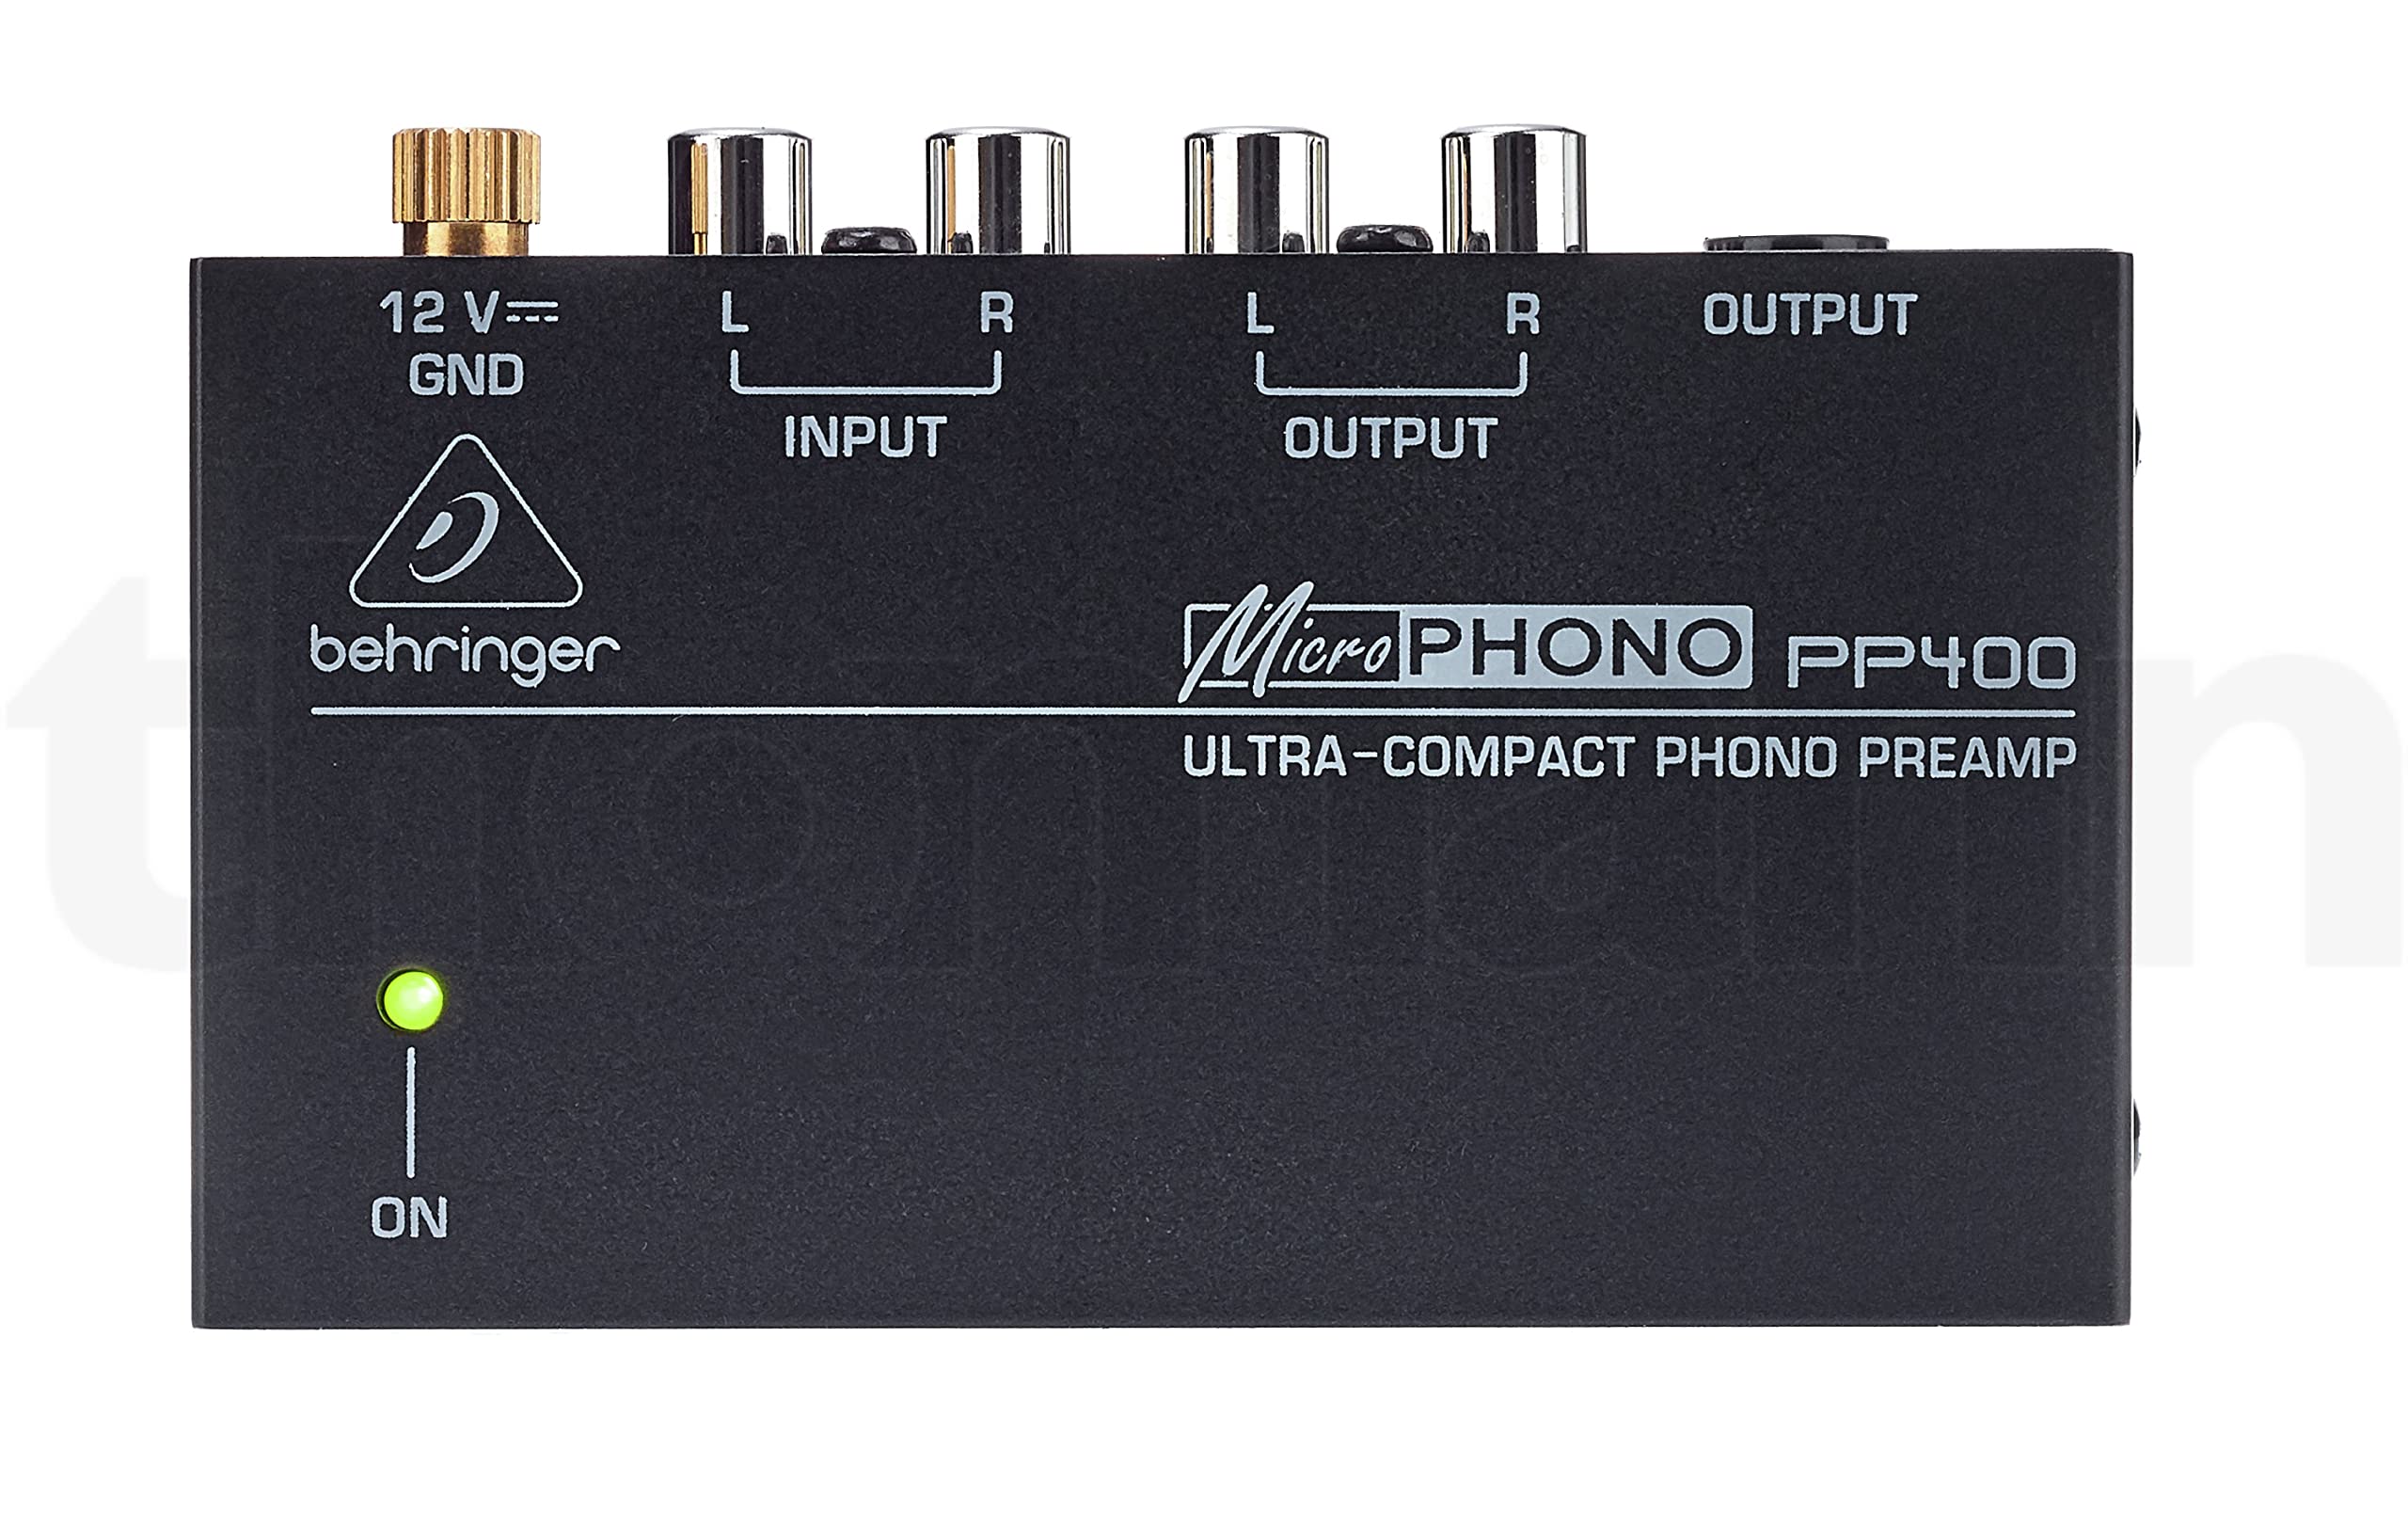 Pas Cher Best Price Square Ultra Compact Phono PREAMP PP400 by BEHRINGER g2Cqfs0dt meilleure vente